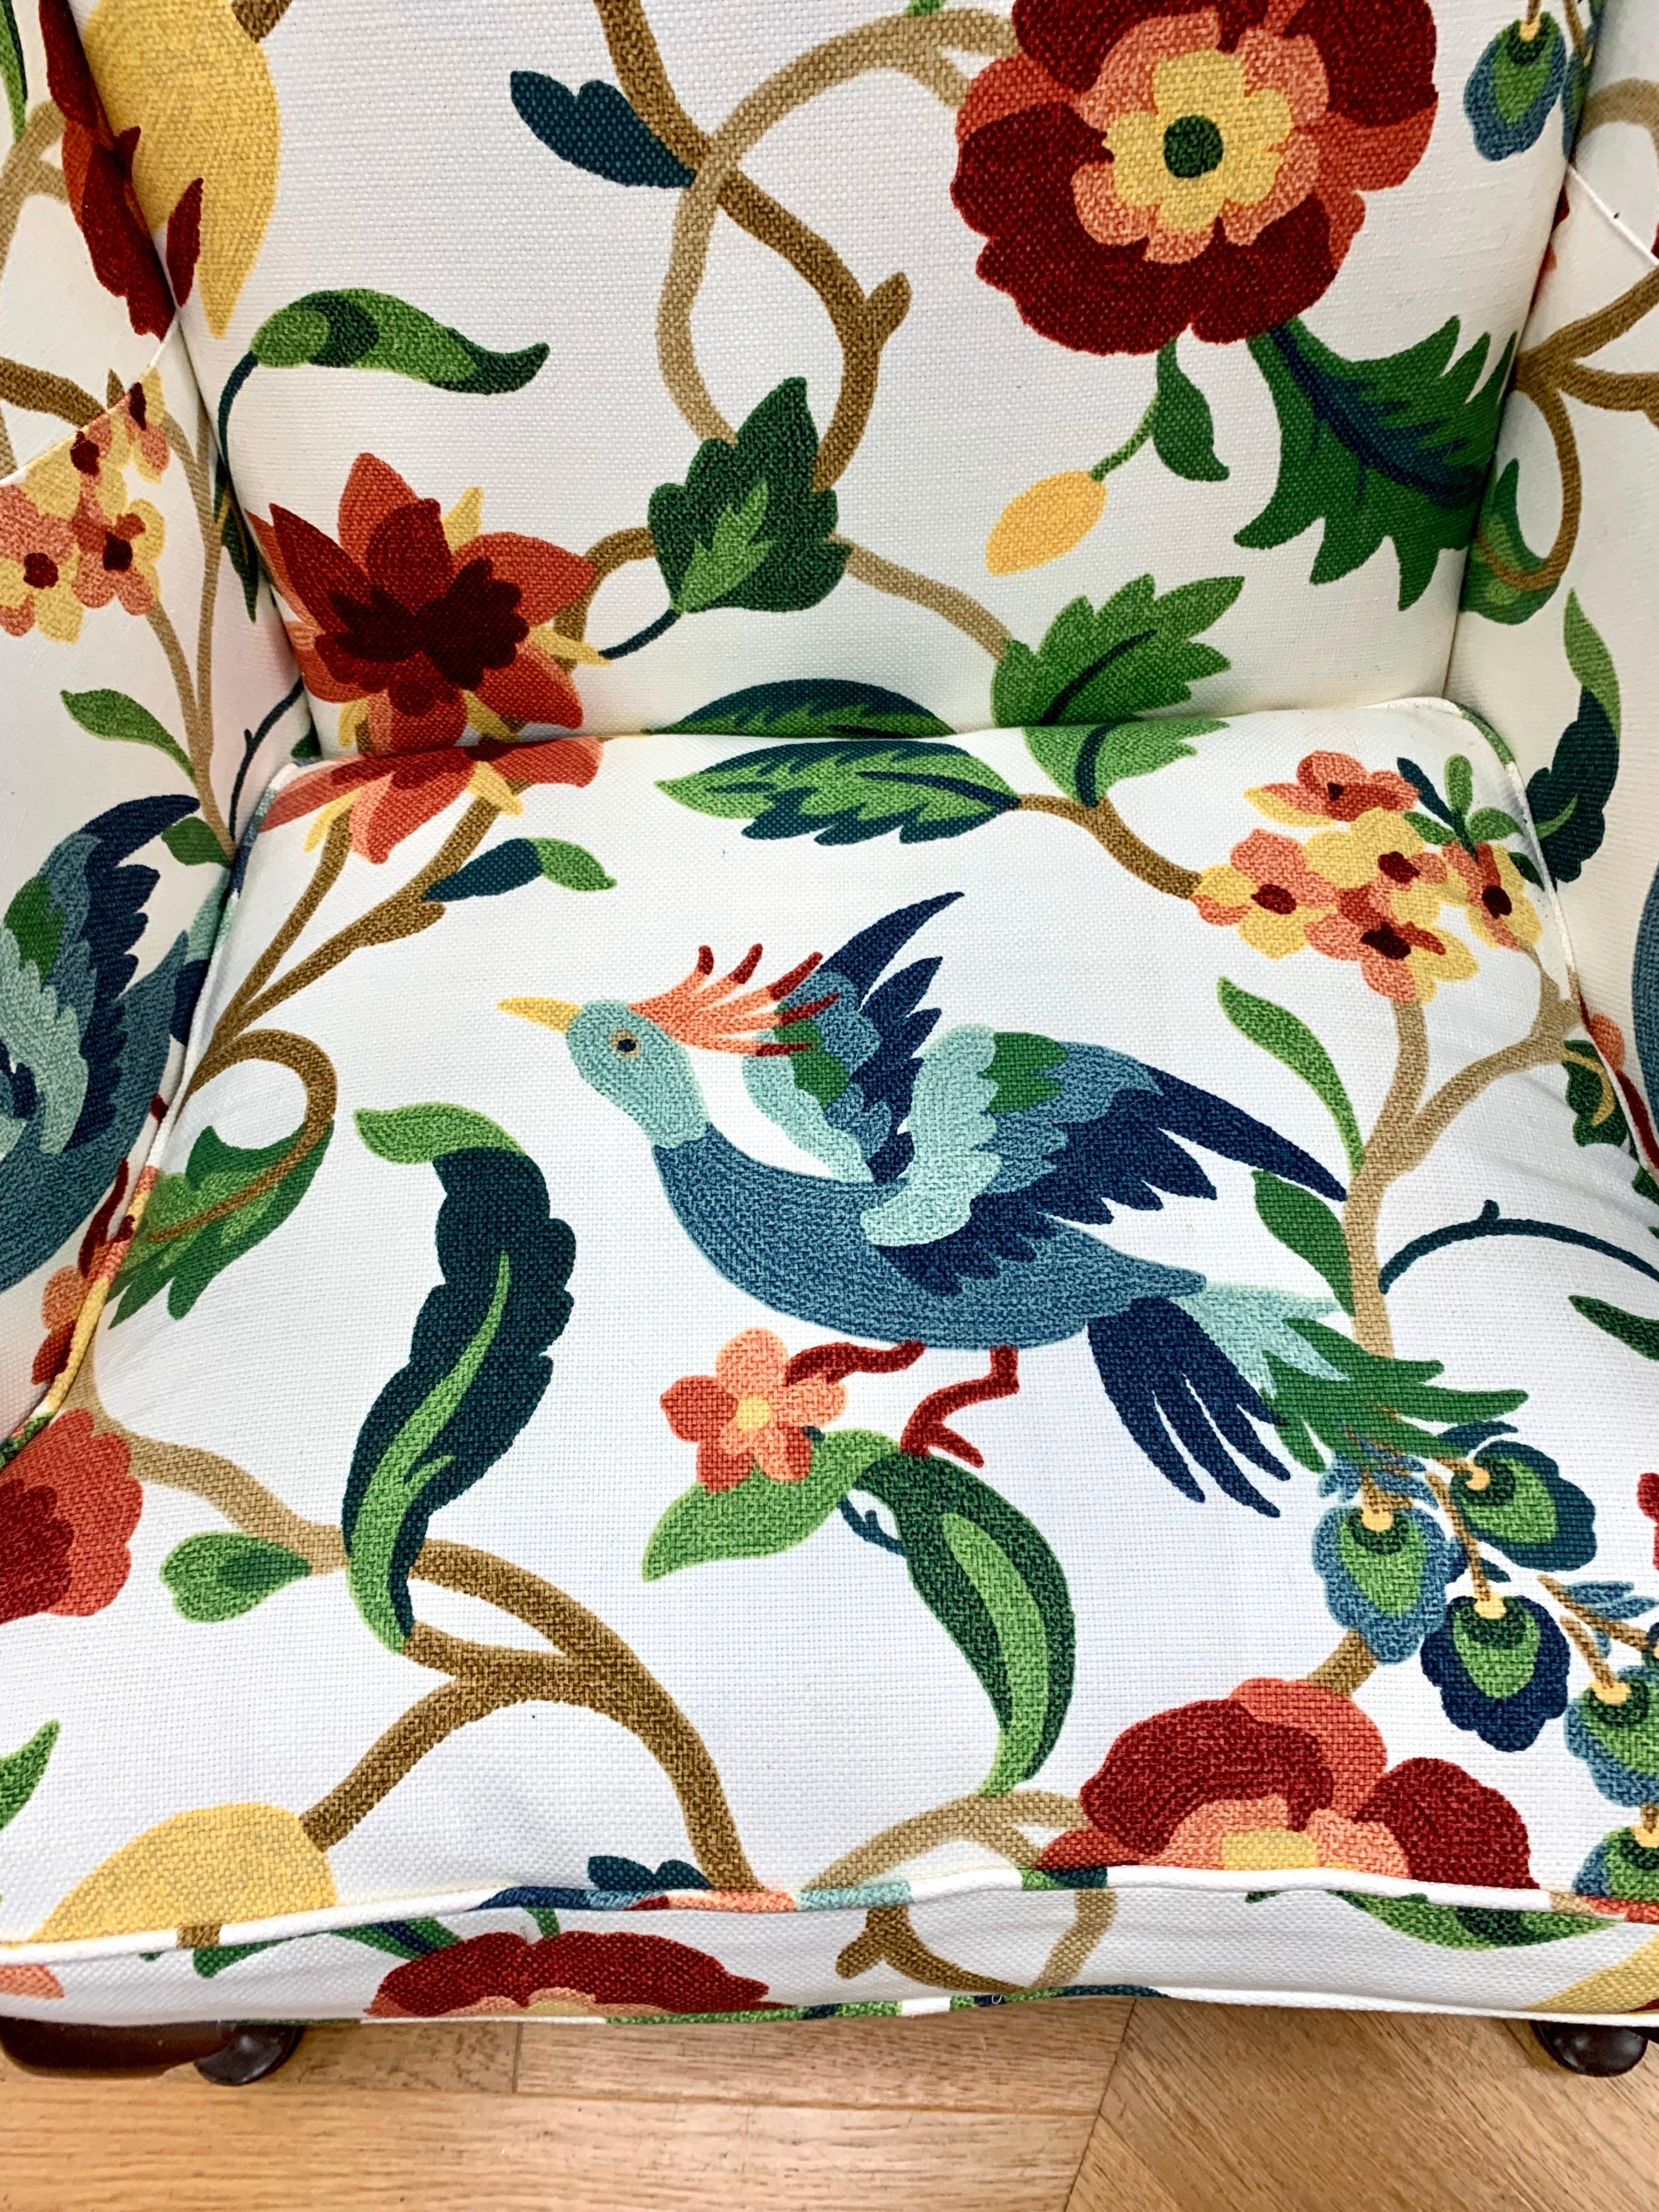 floral wingback chair